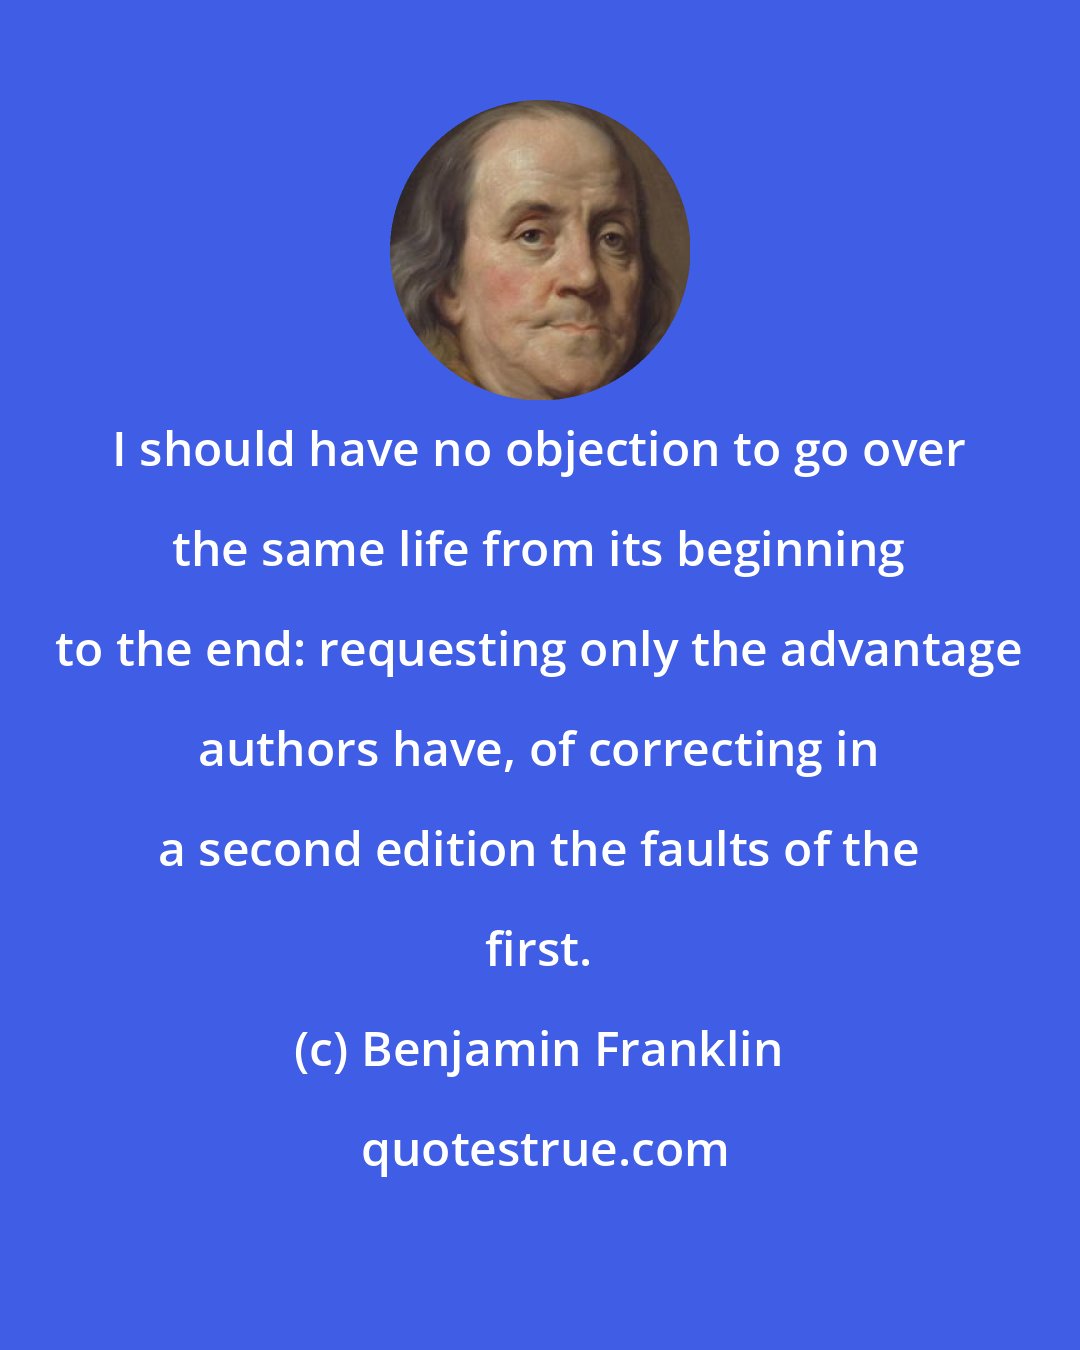 Benjamin Franklin: I should have no objection to go over the same life from its beginning to the end: requesting only the advantage authors have, of correcting in a second edition the faults of the first.